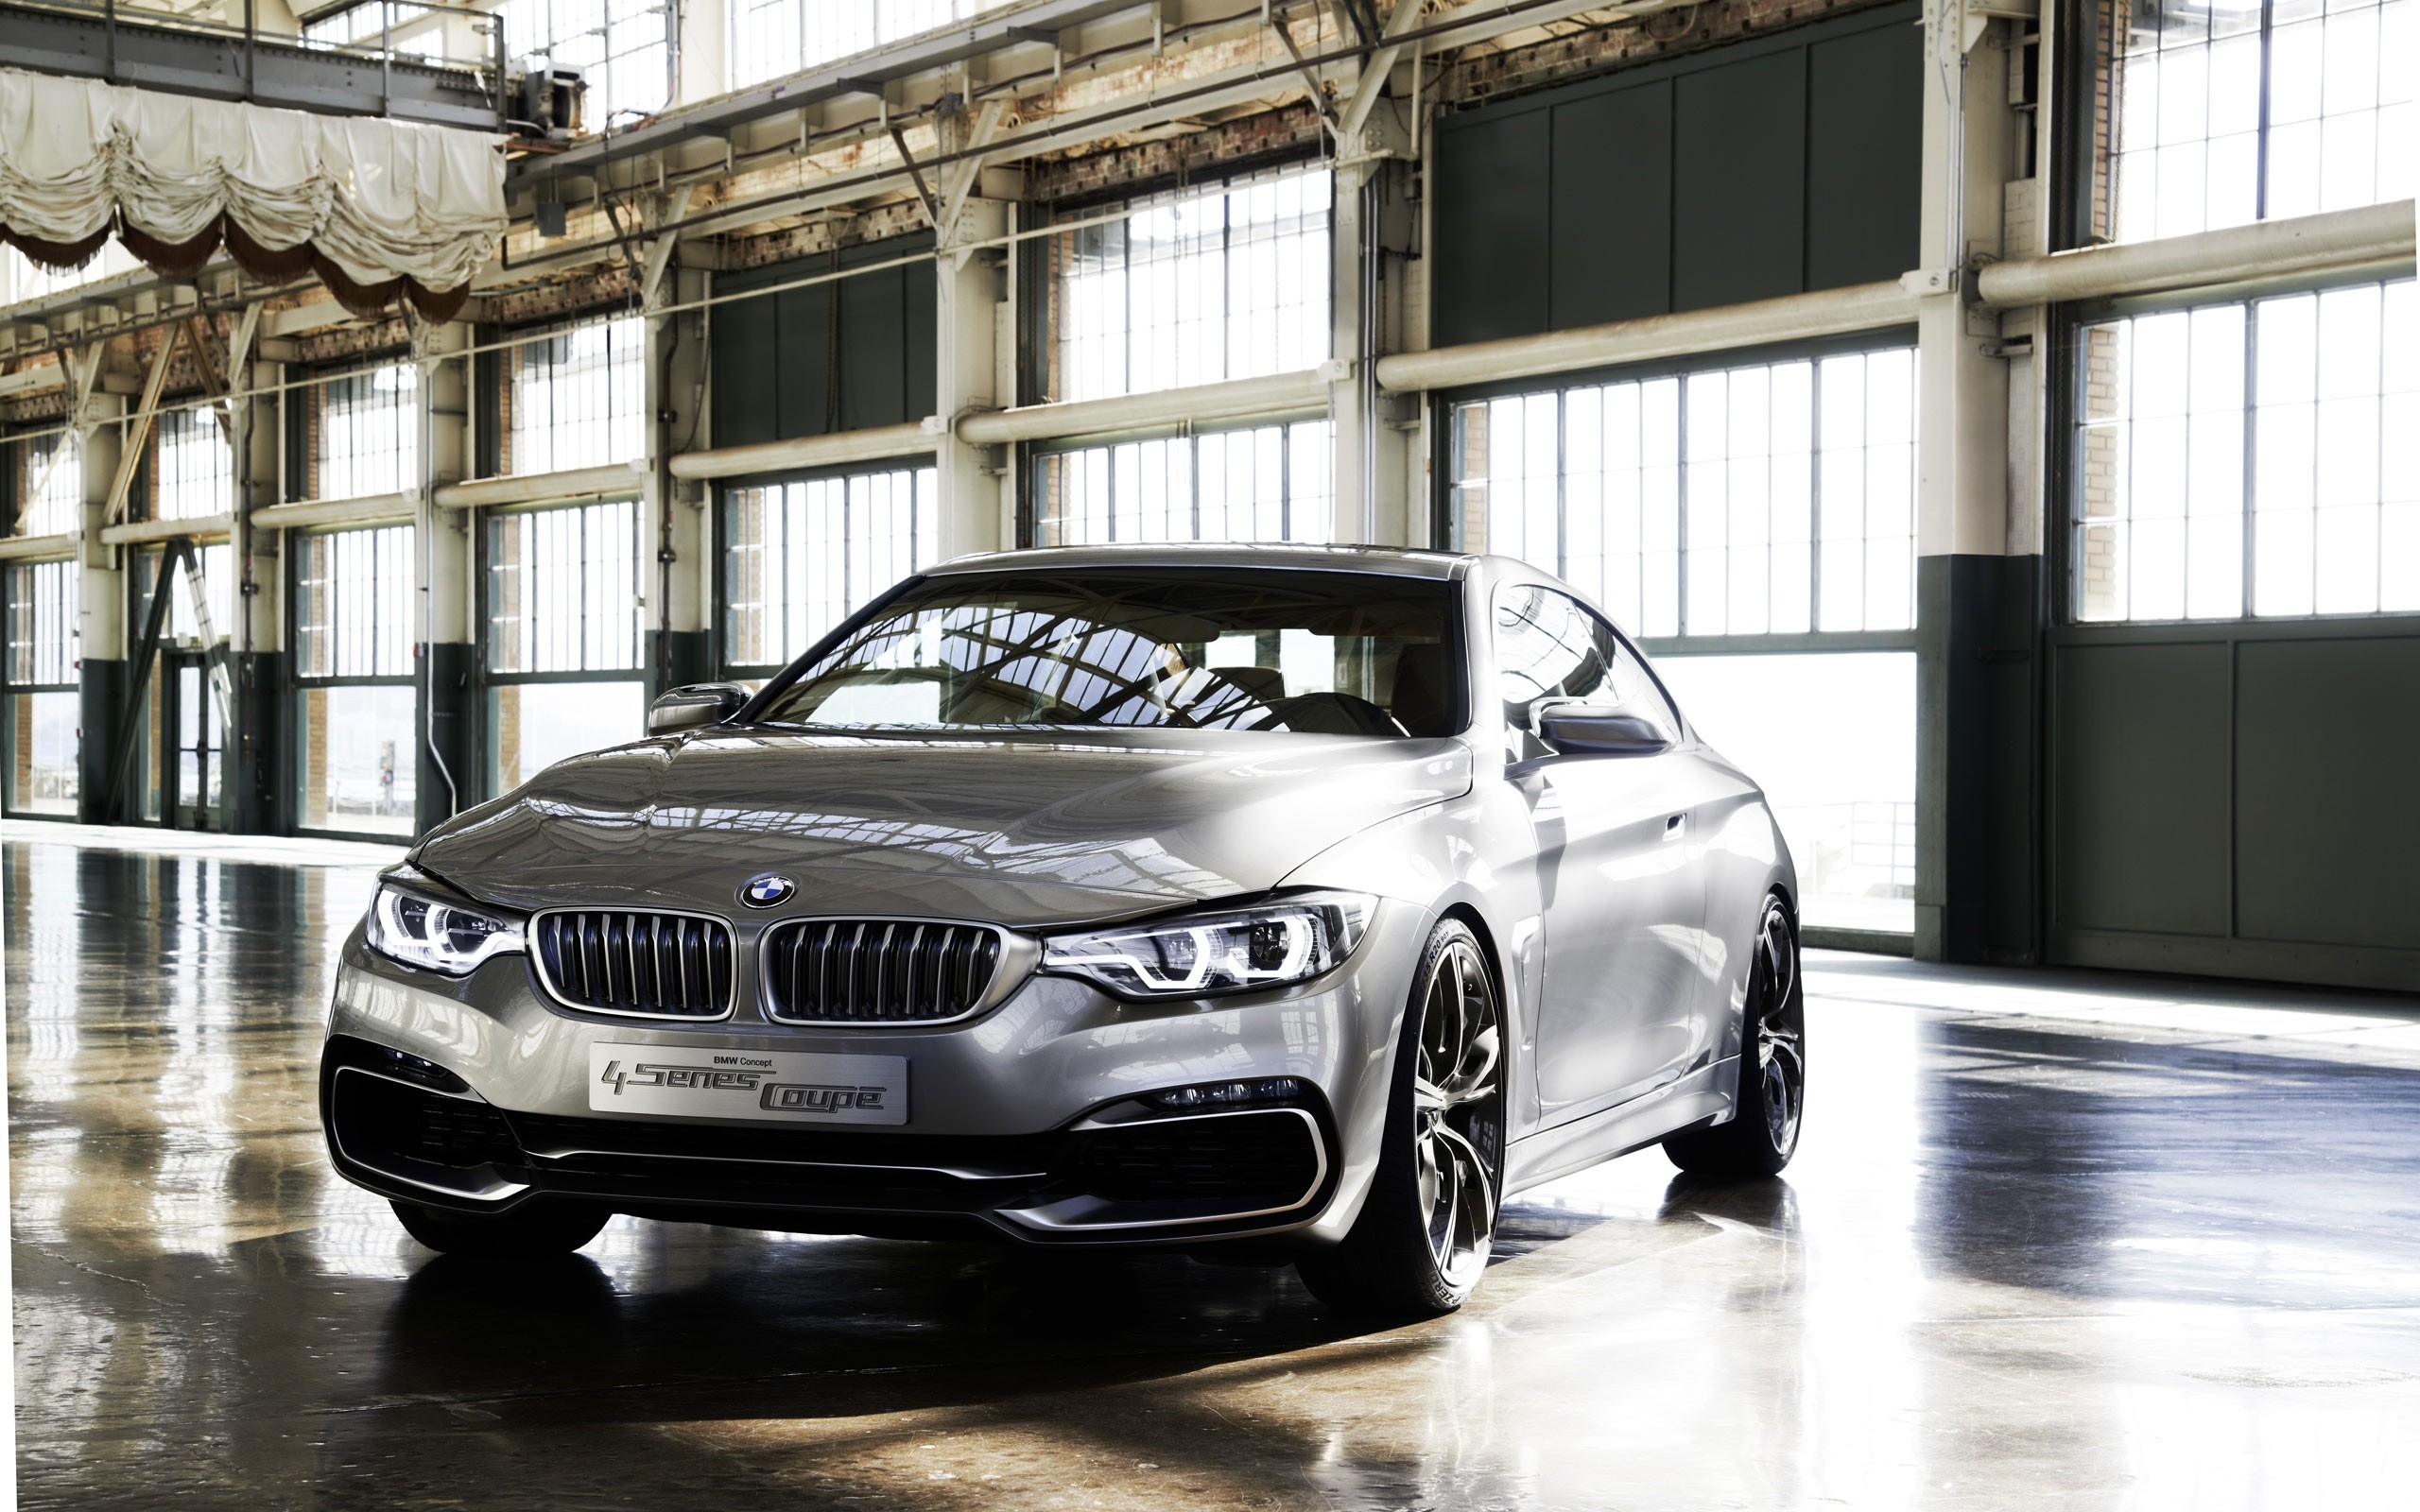 bmw, 4, Series, Coupe, Bmw, 4, Series, Coupe, Concept Wallpaper